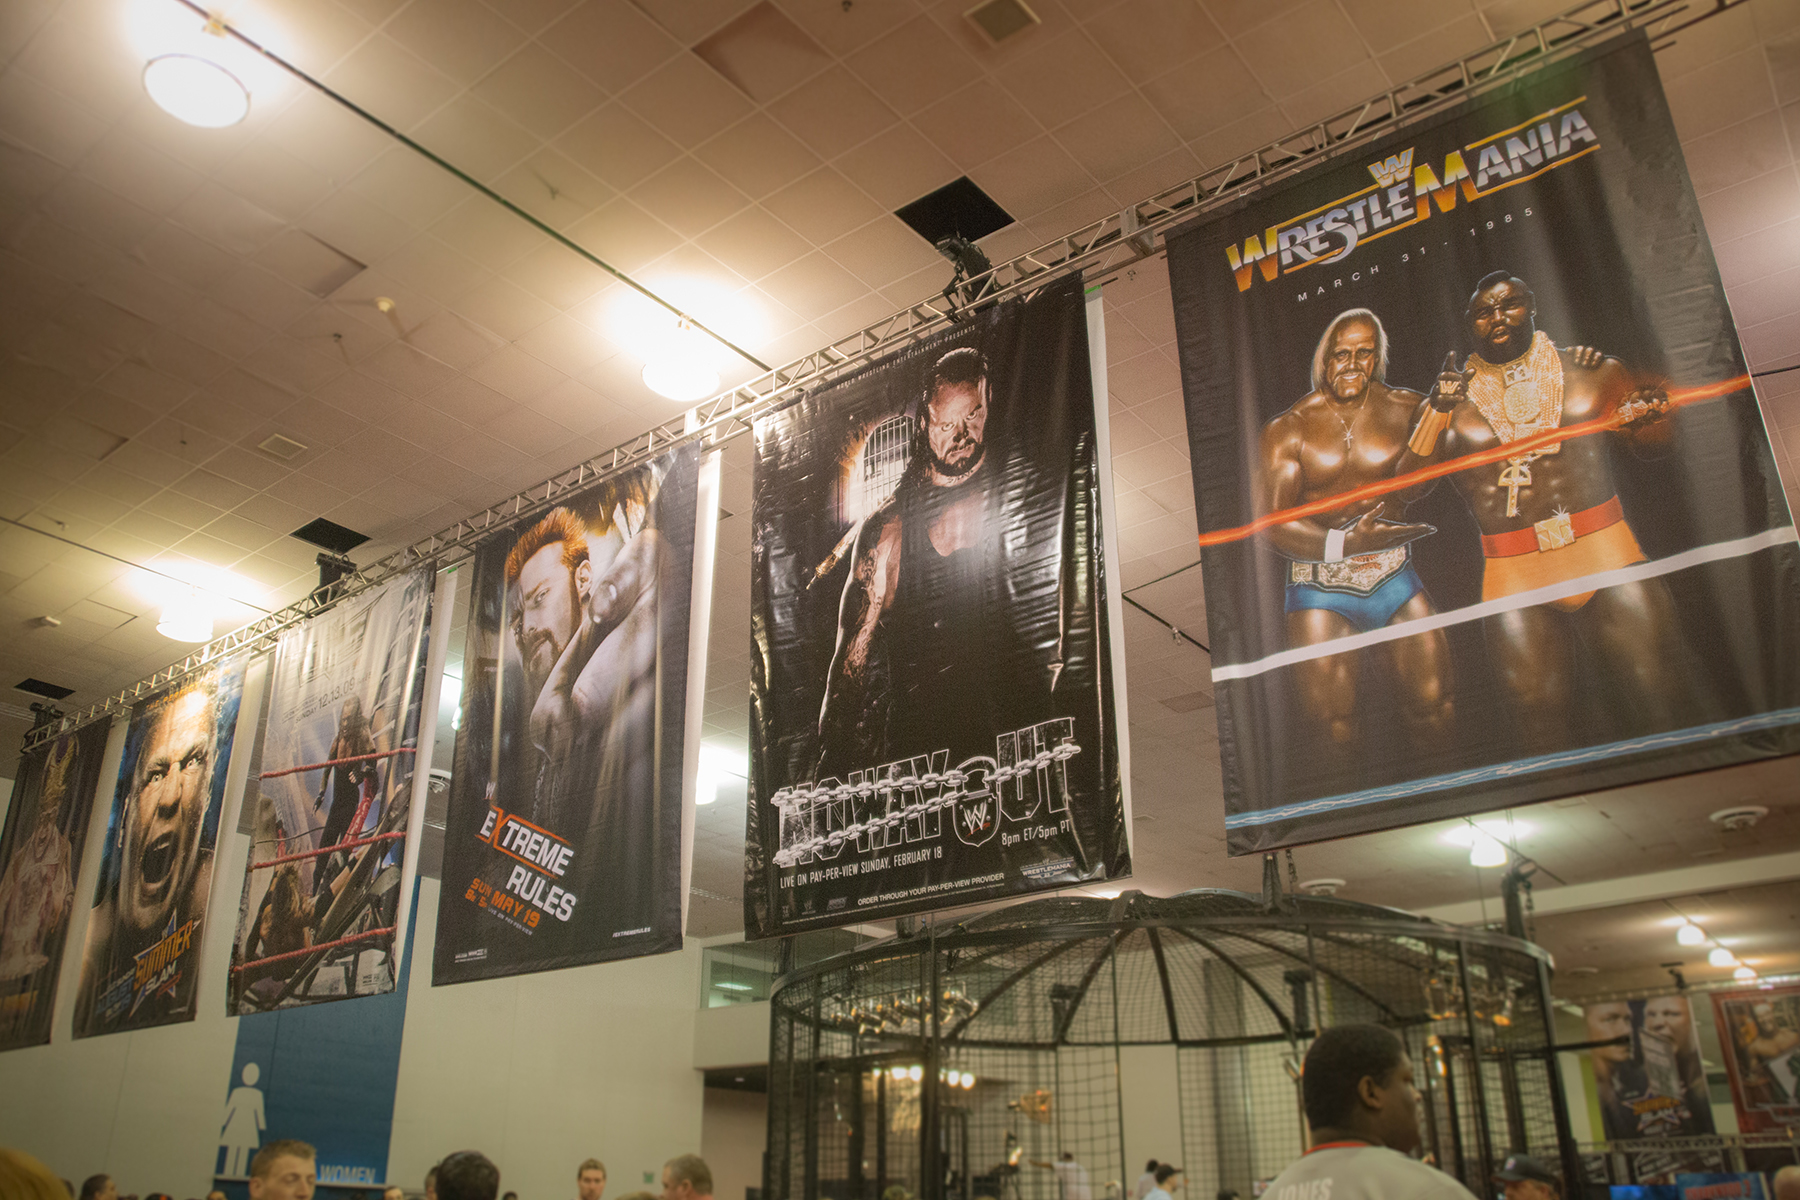 wm posters